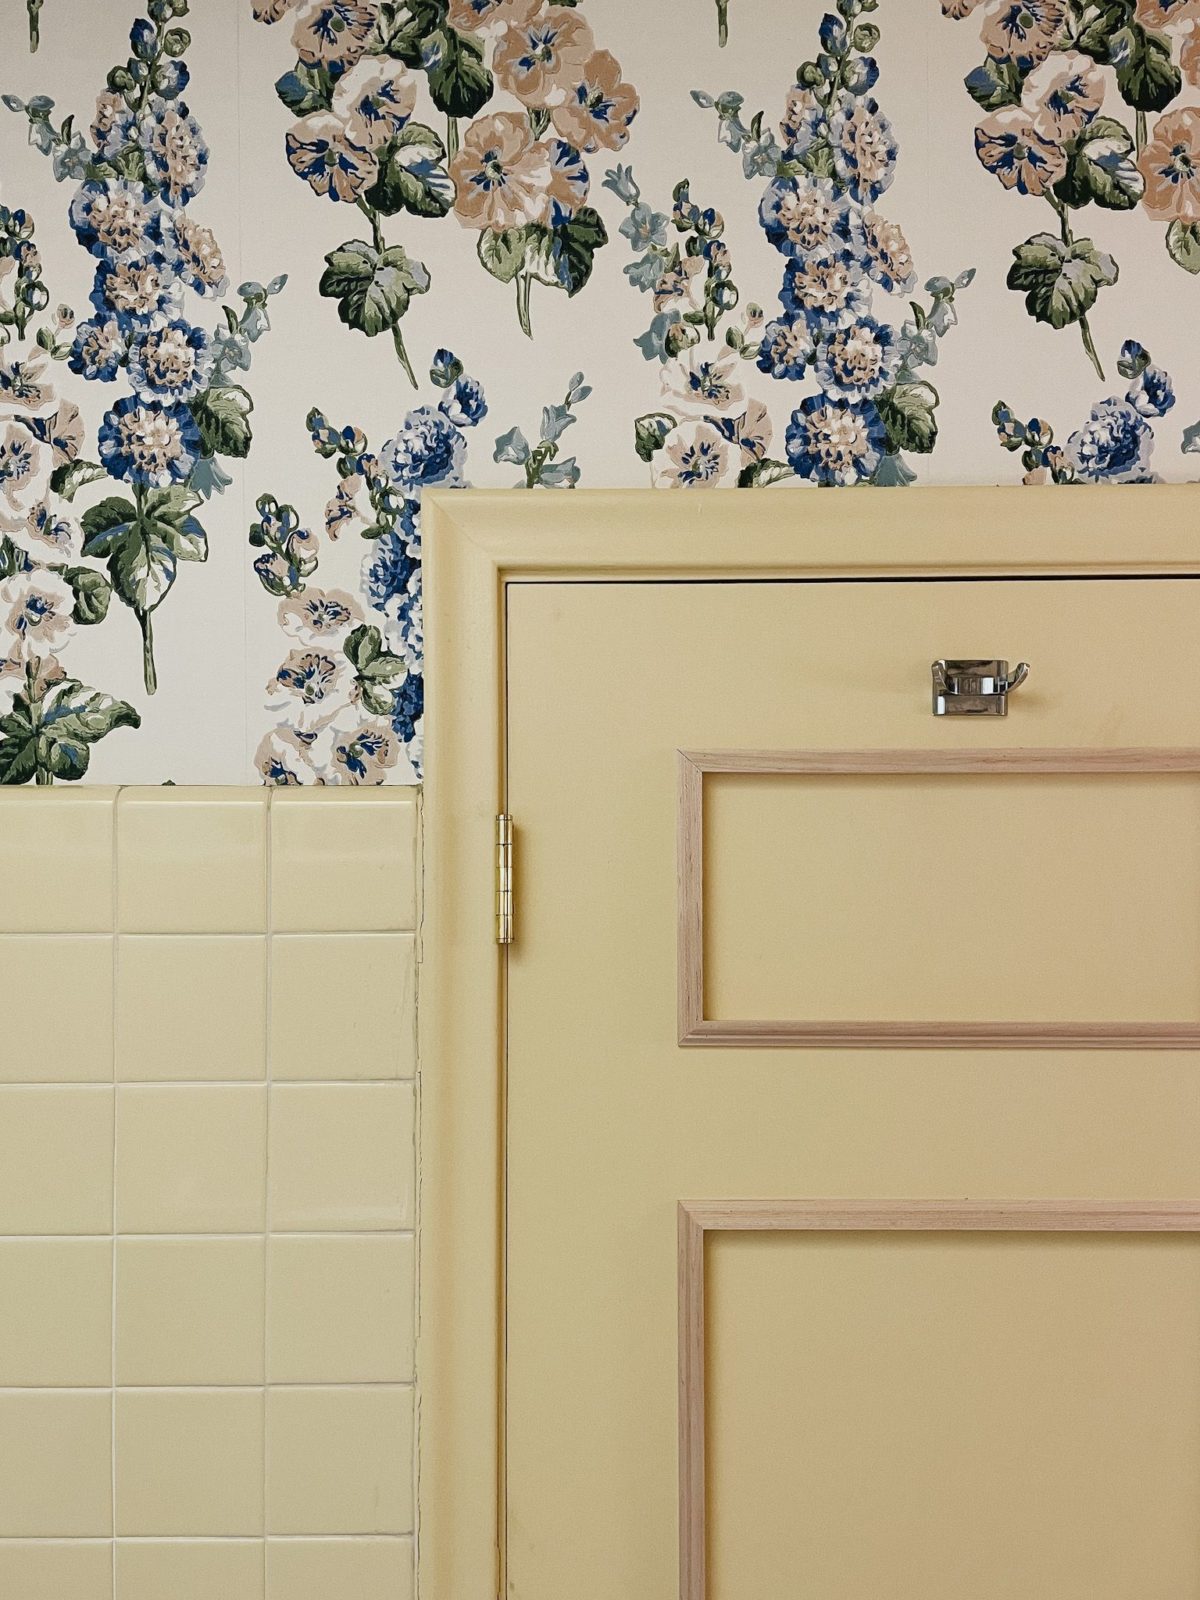 It's Here! Take a Look at the Design Reveal of Our Yellow Bathroom | Wit & Delight